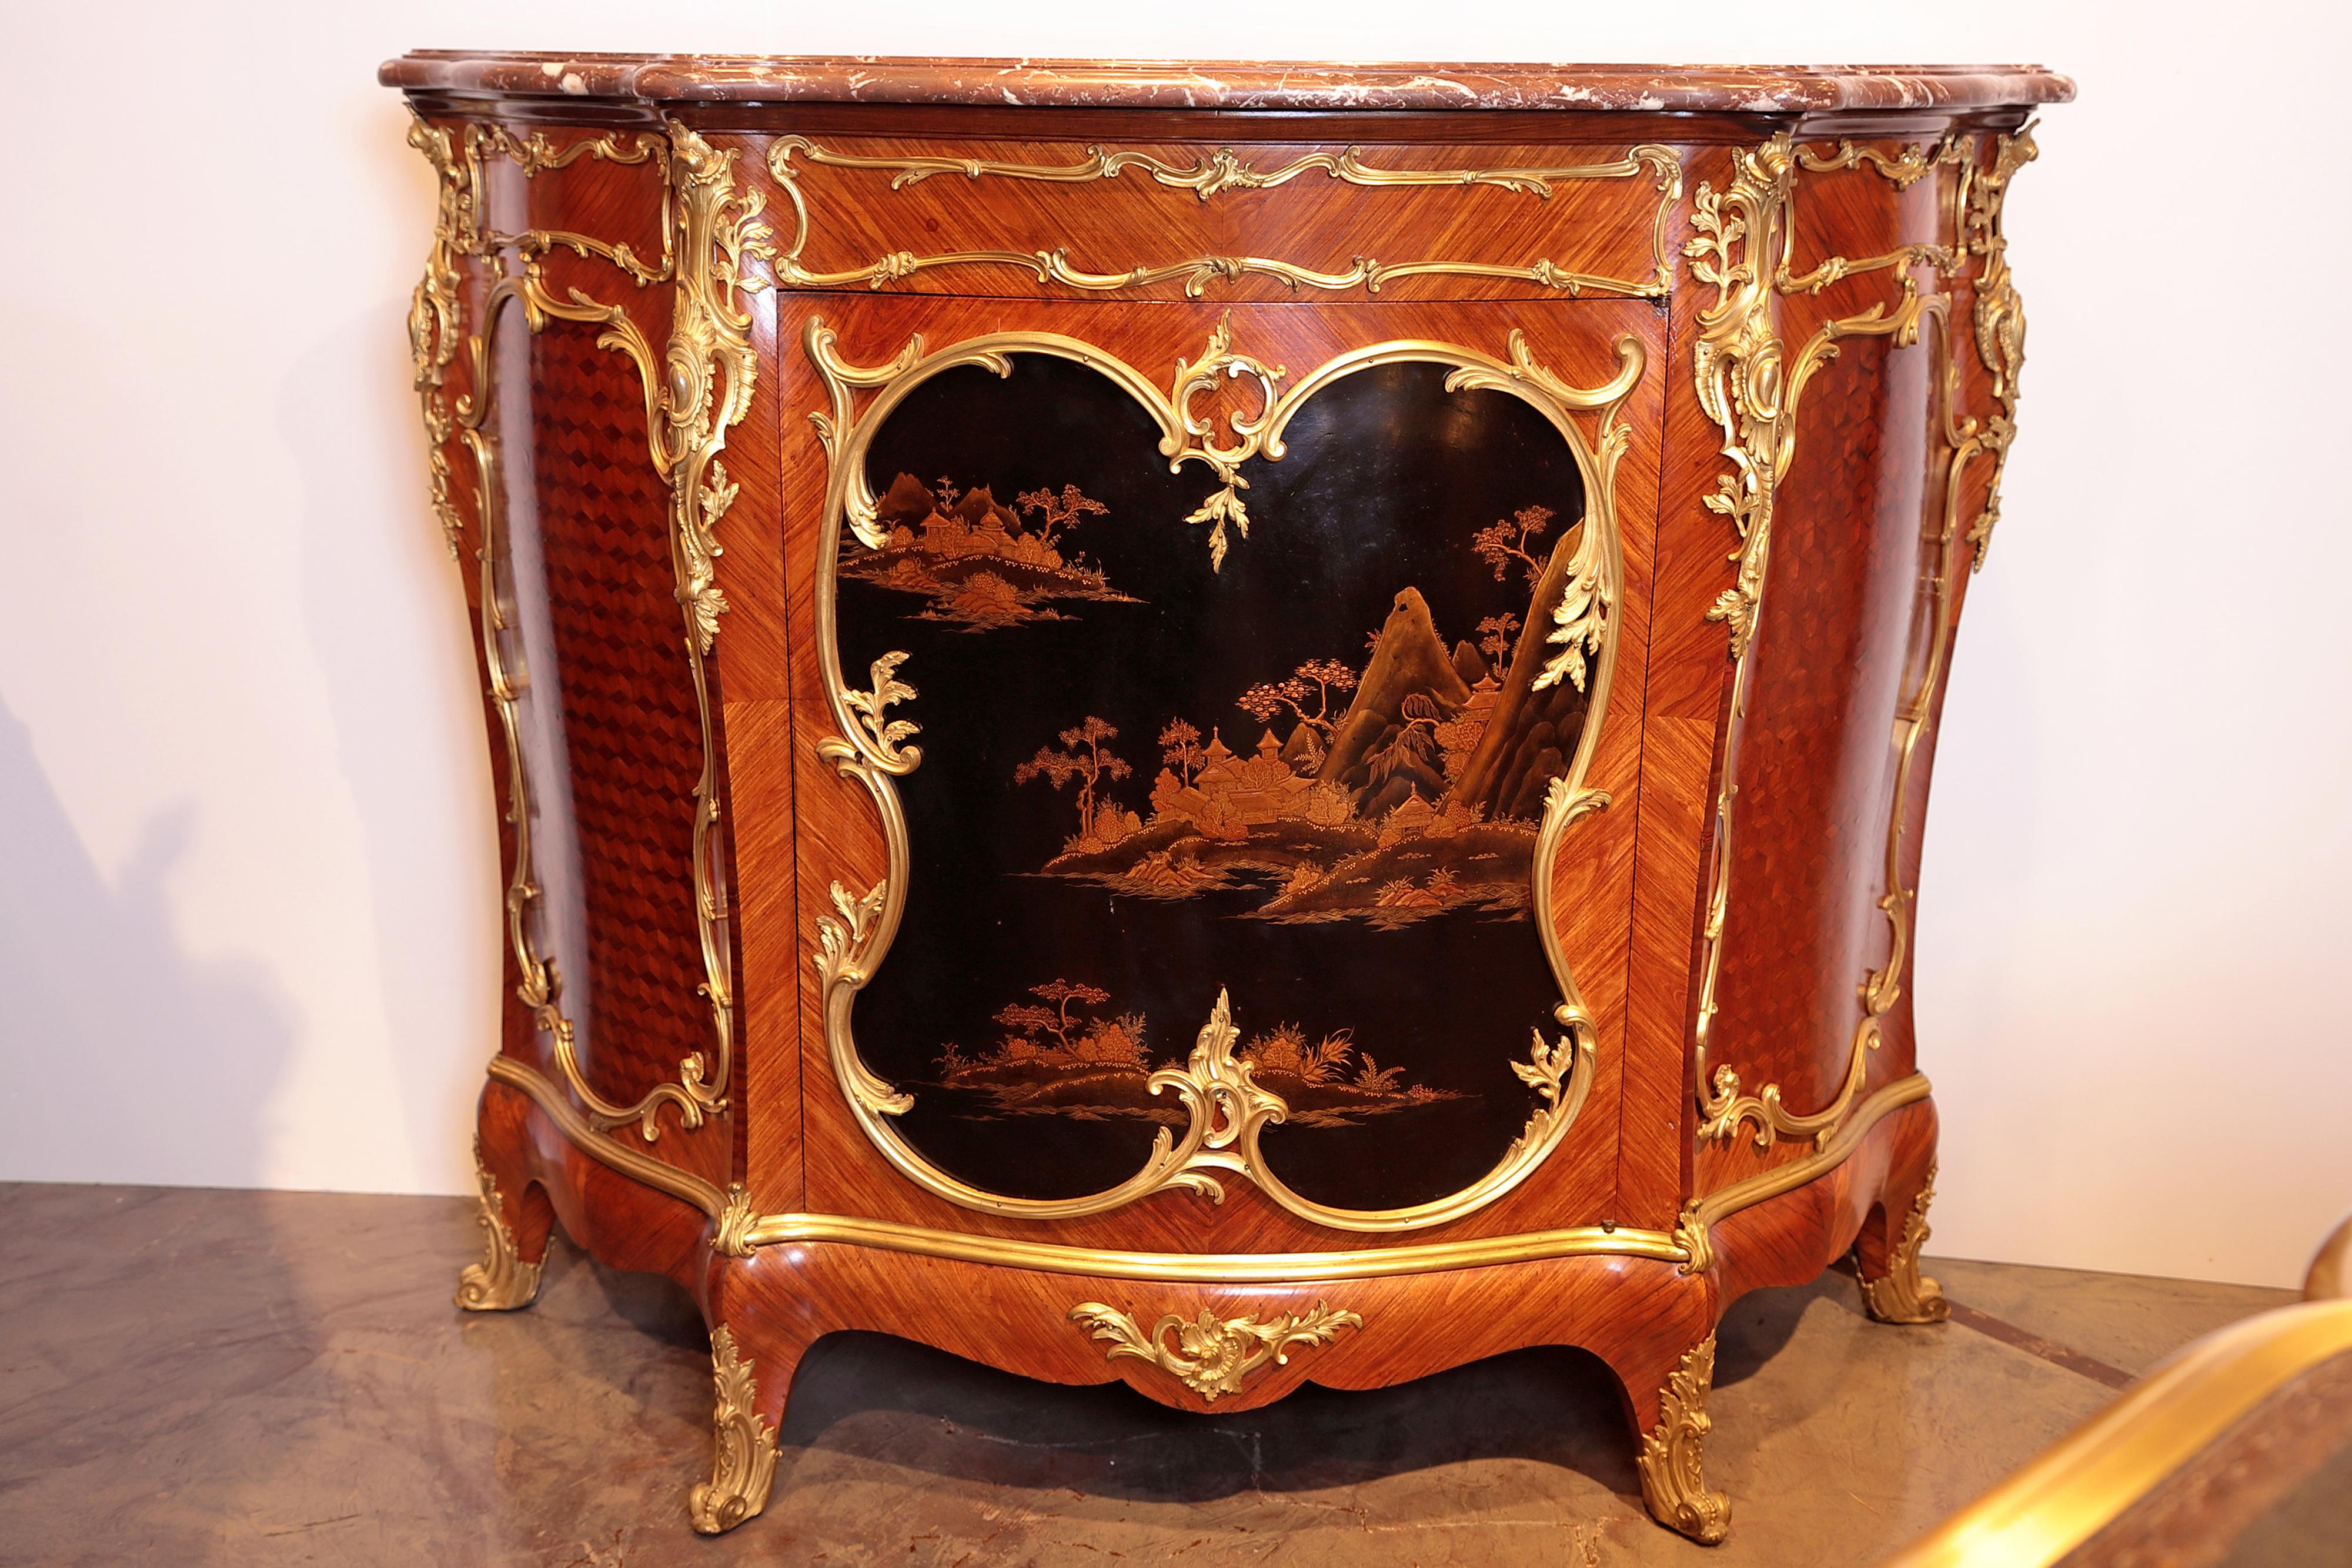 
Very fine Lacquer Chiniosiere Side Cabinet by Raulin, Paris, circa 1880
Gilt-bronze mounted tulipwood cabinet with a shaped rectangular marble top above a cupboard door inset with a lacquer landscape panel with gilt decoration on a black ground,